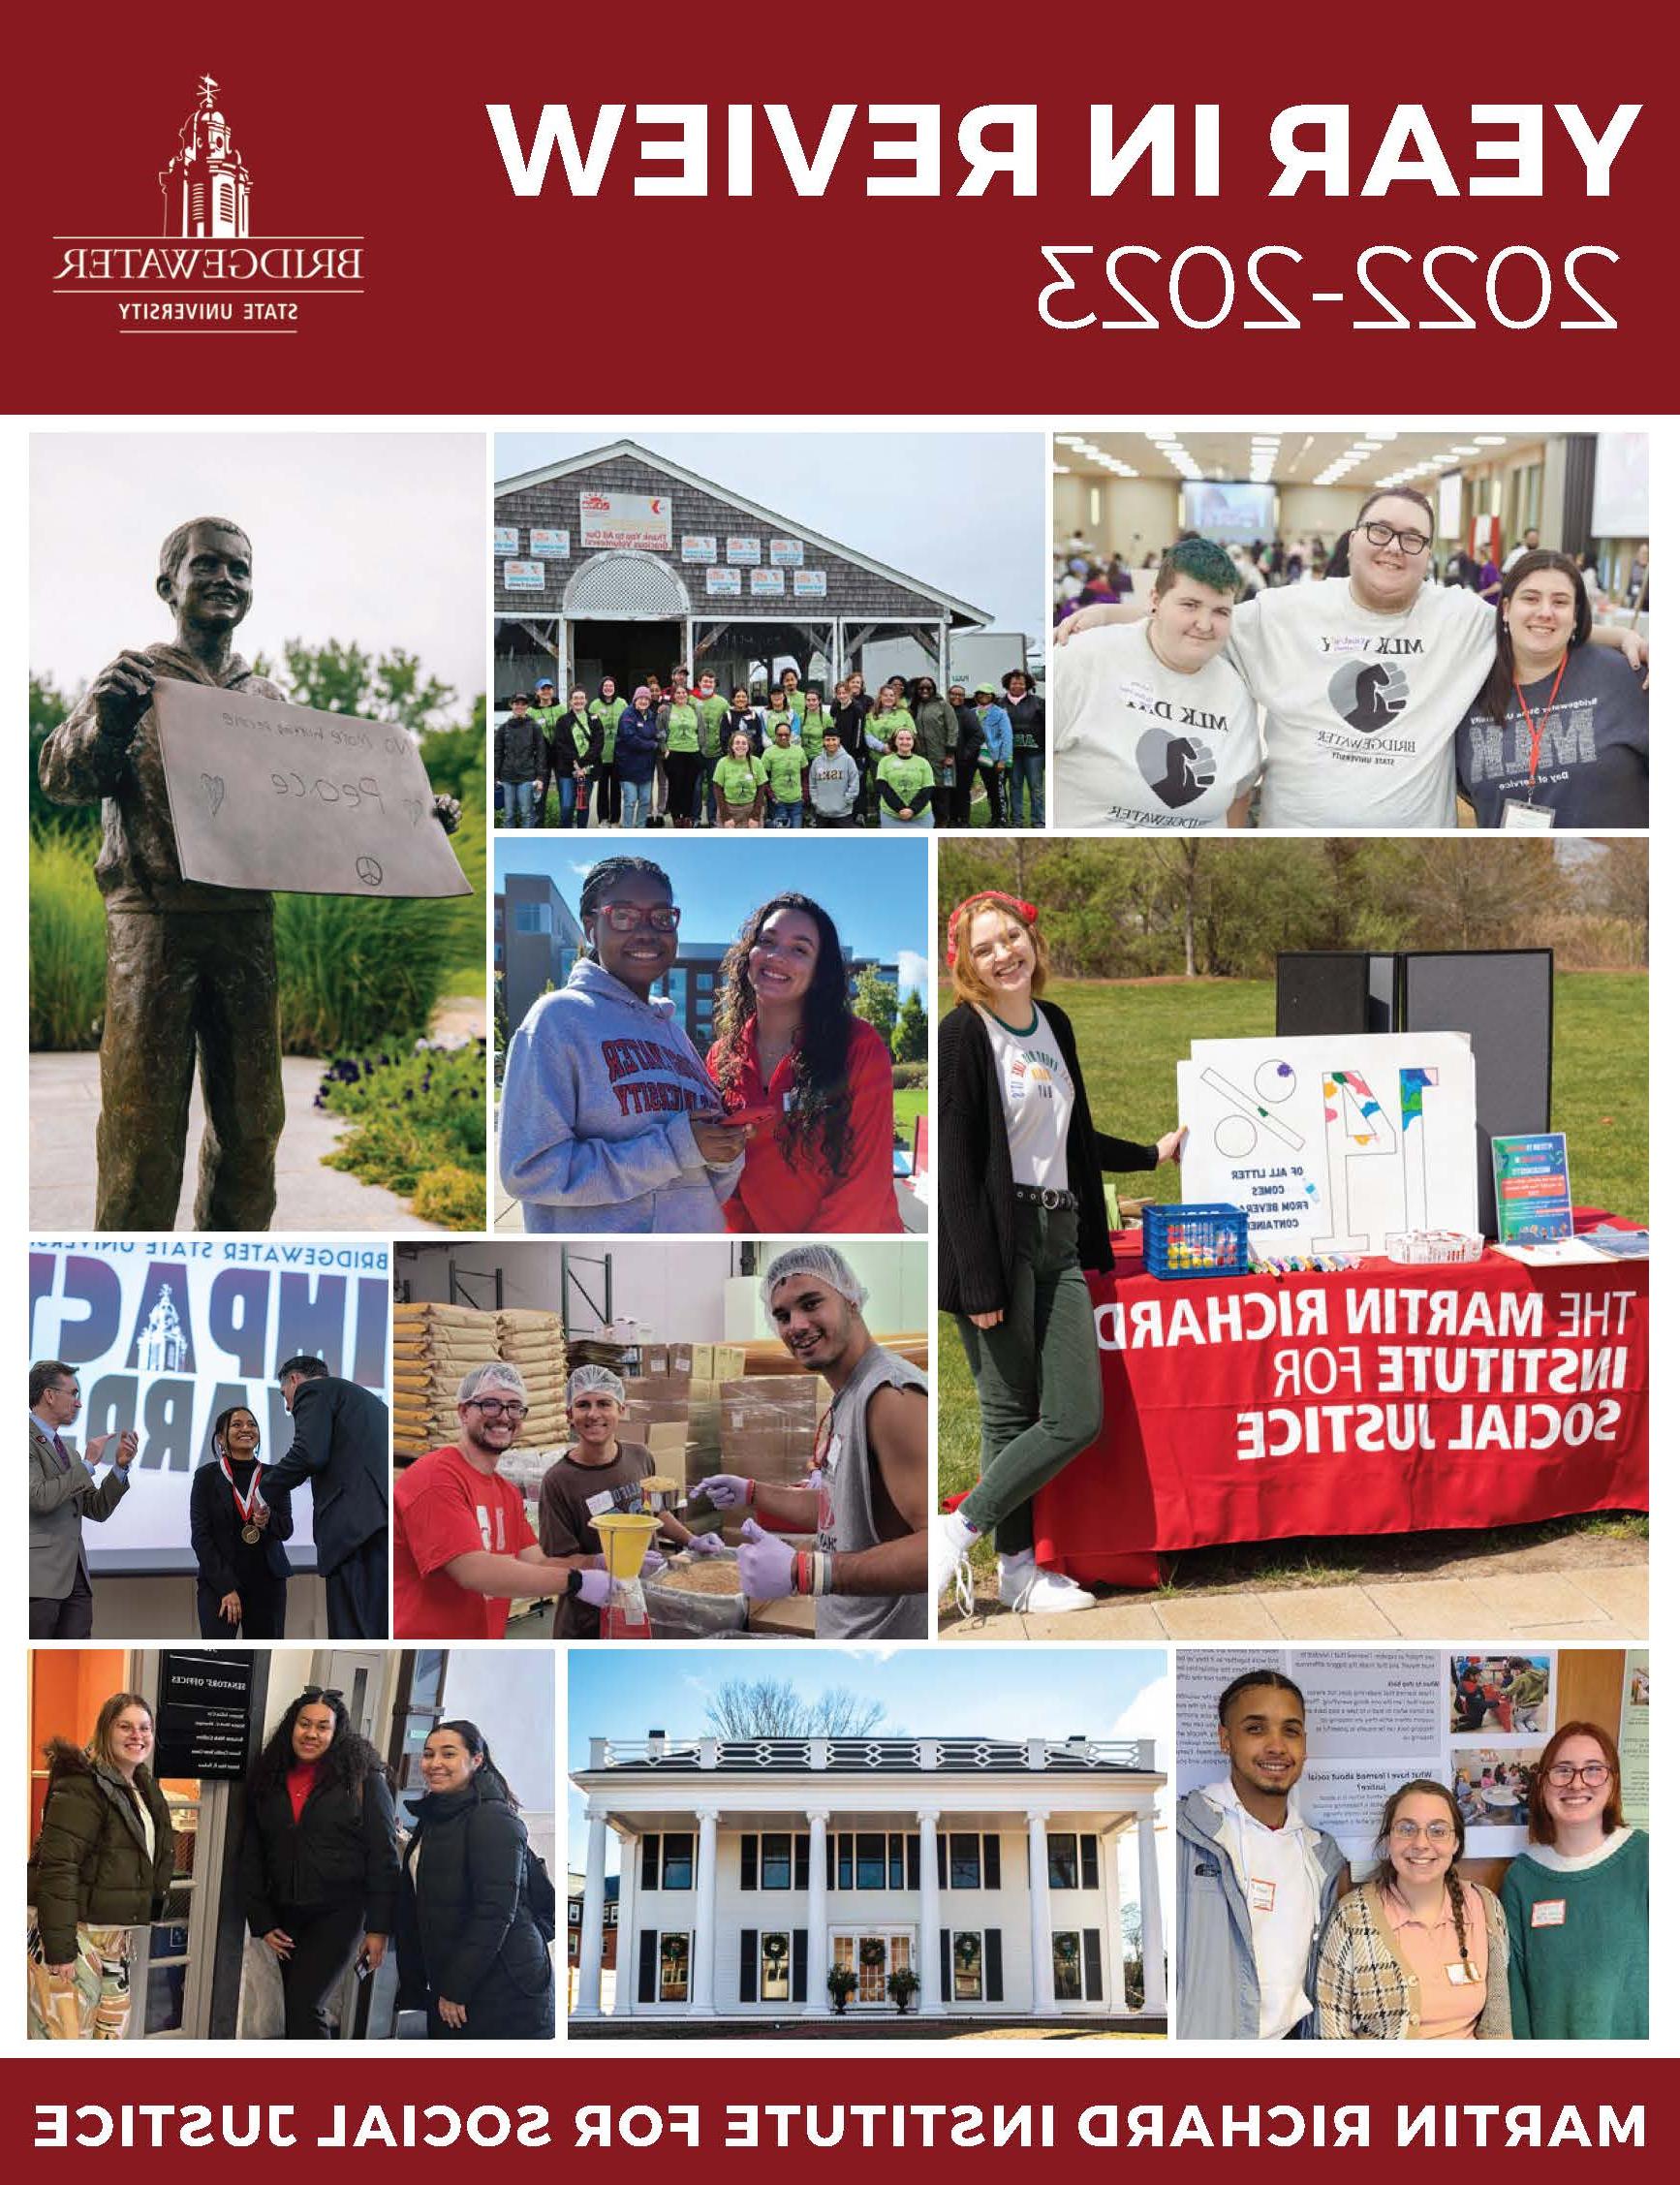 Cover of the Year in Review 2022-2023 for the Martin Richard Institute for Social Justice